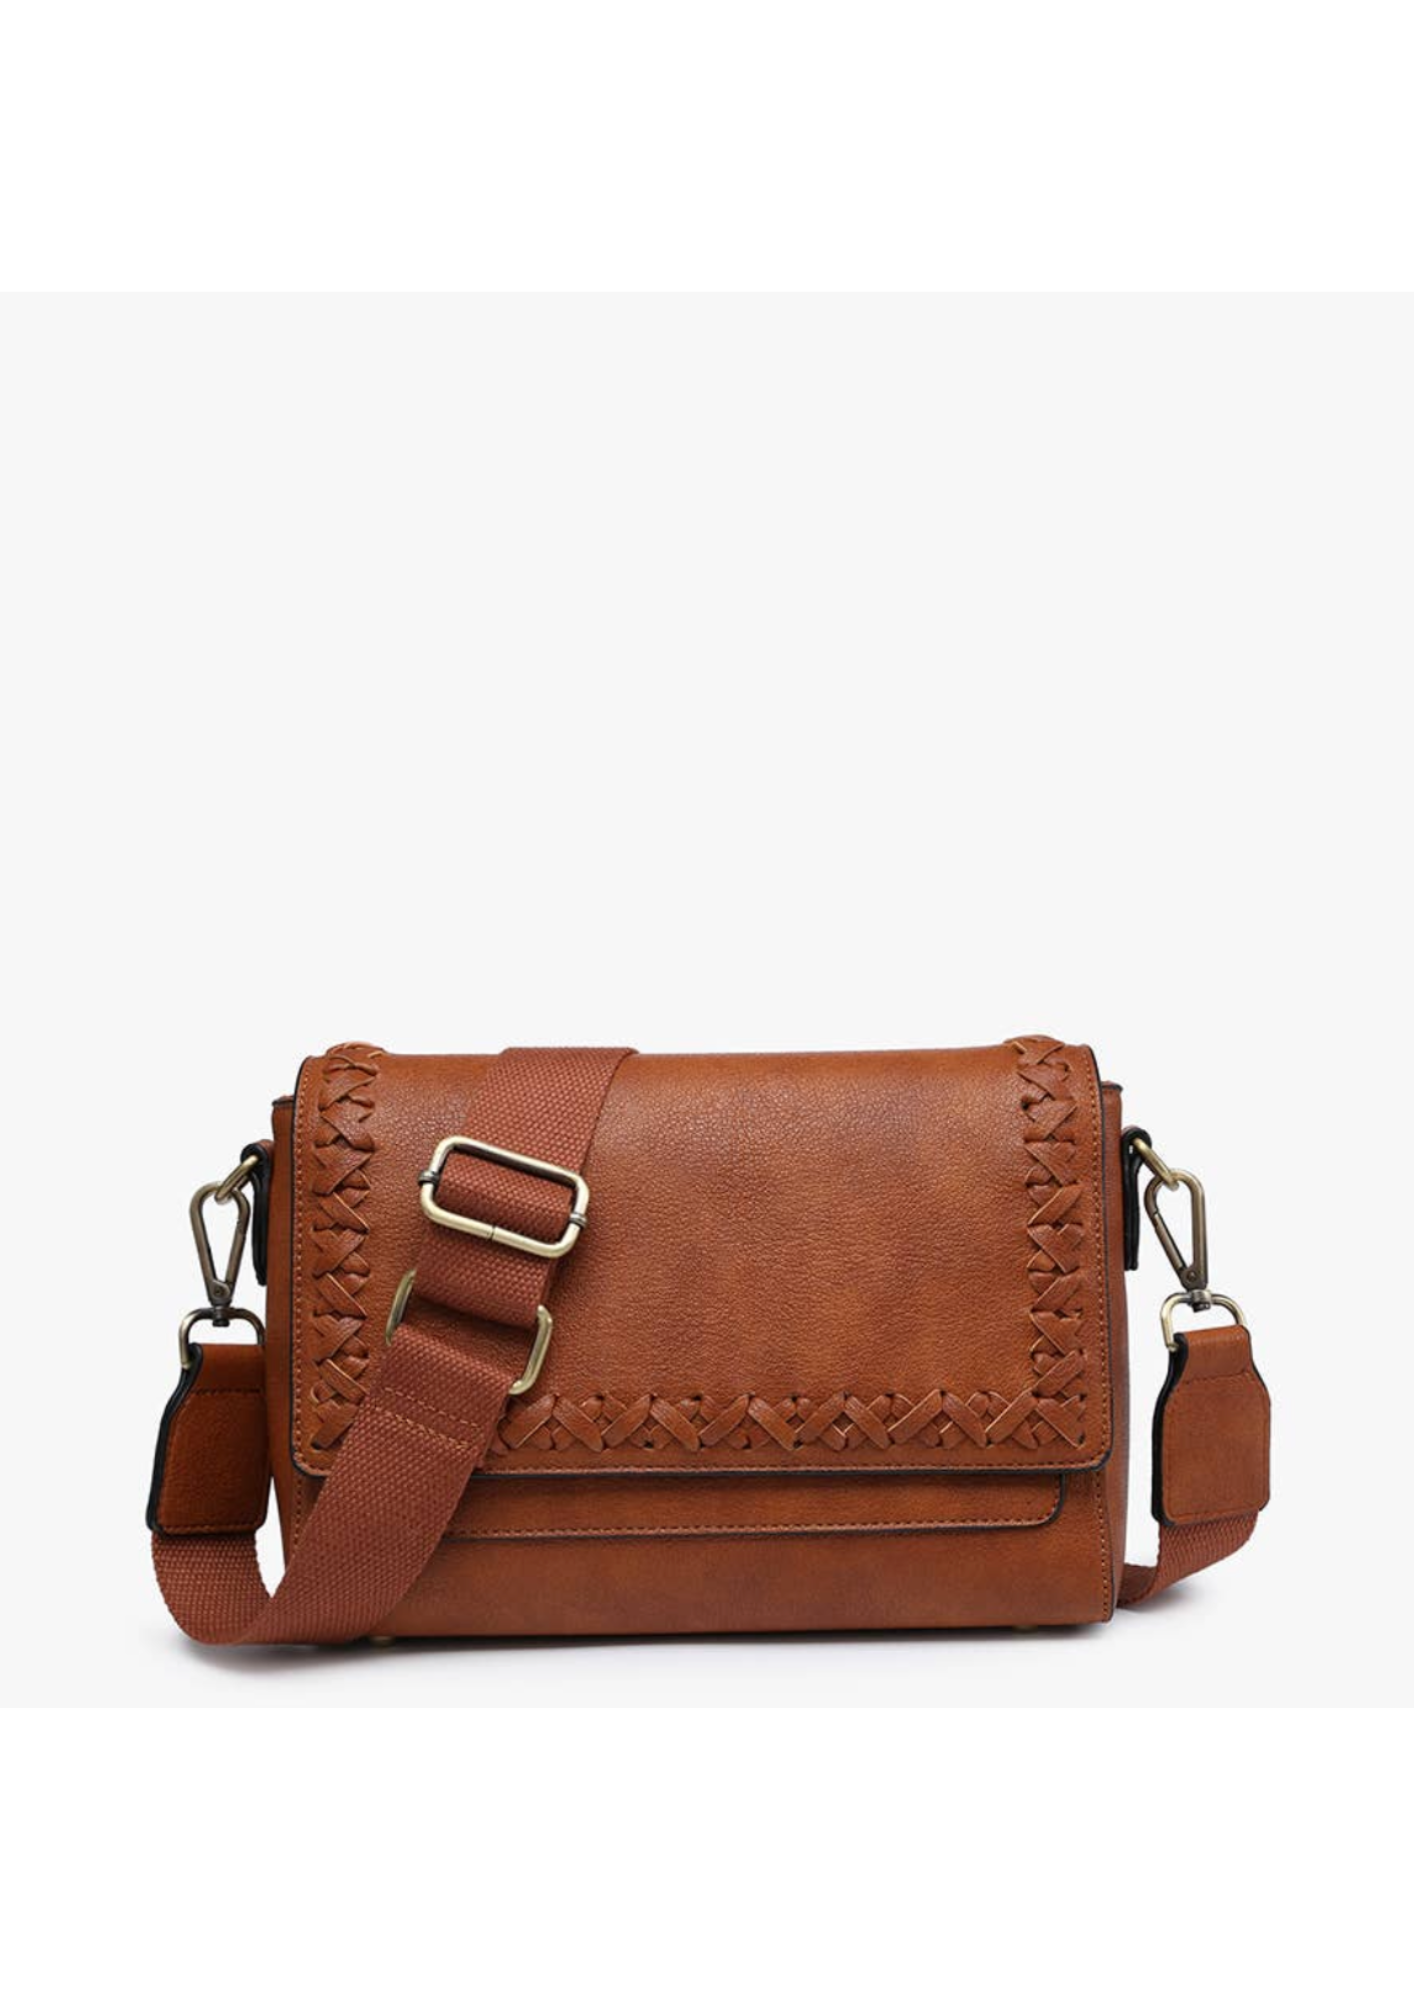 Vegan leather purse on brown with front flap over and stitch details. Flap has a magnetic closure and back has a zipper pocket. Strap is adjustable and can be used as a crossbody or shoulder bag. 